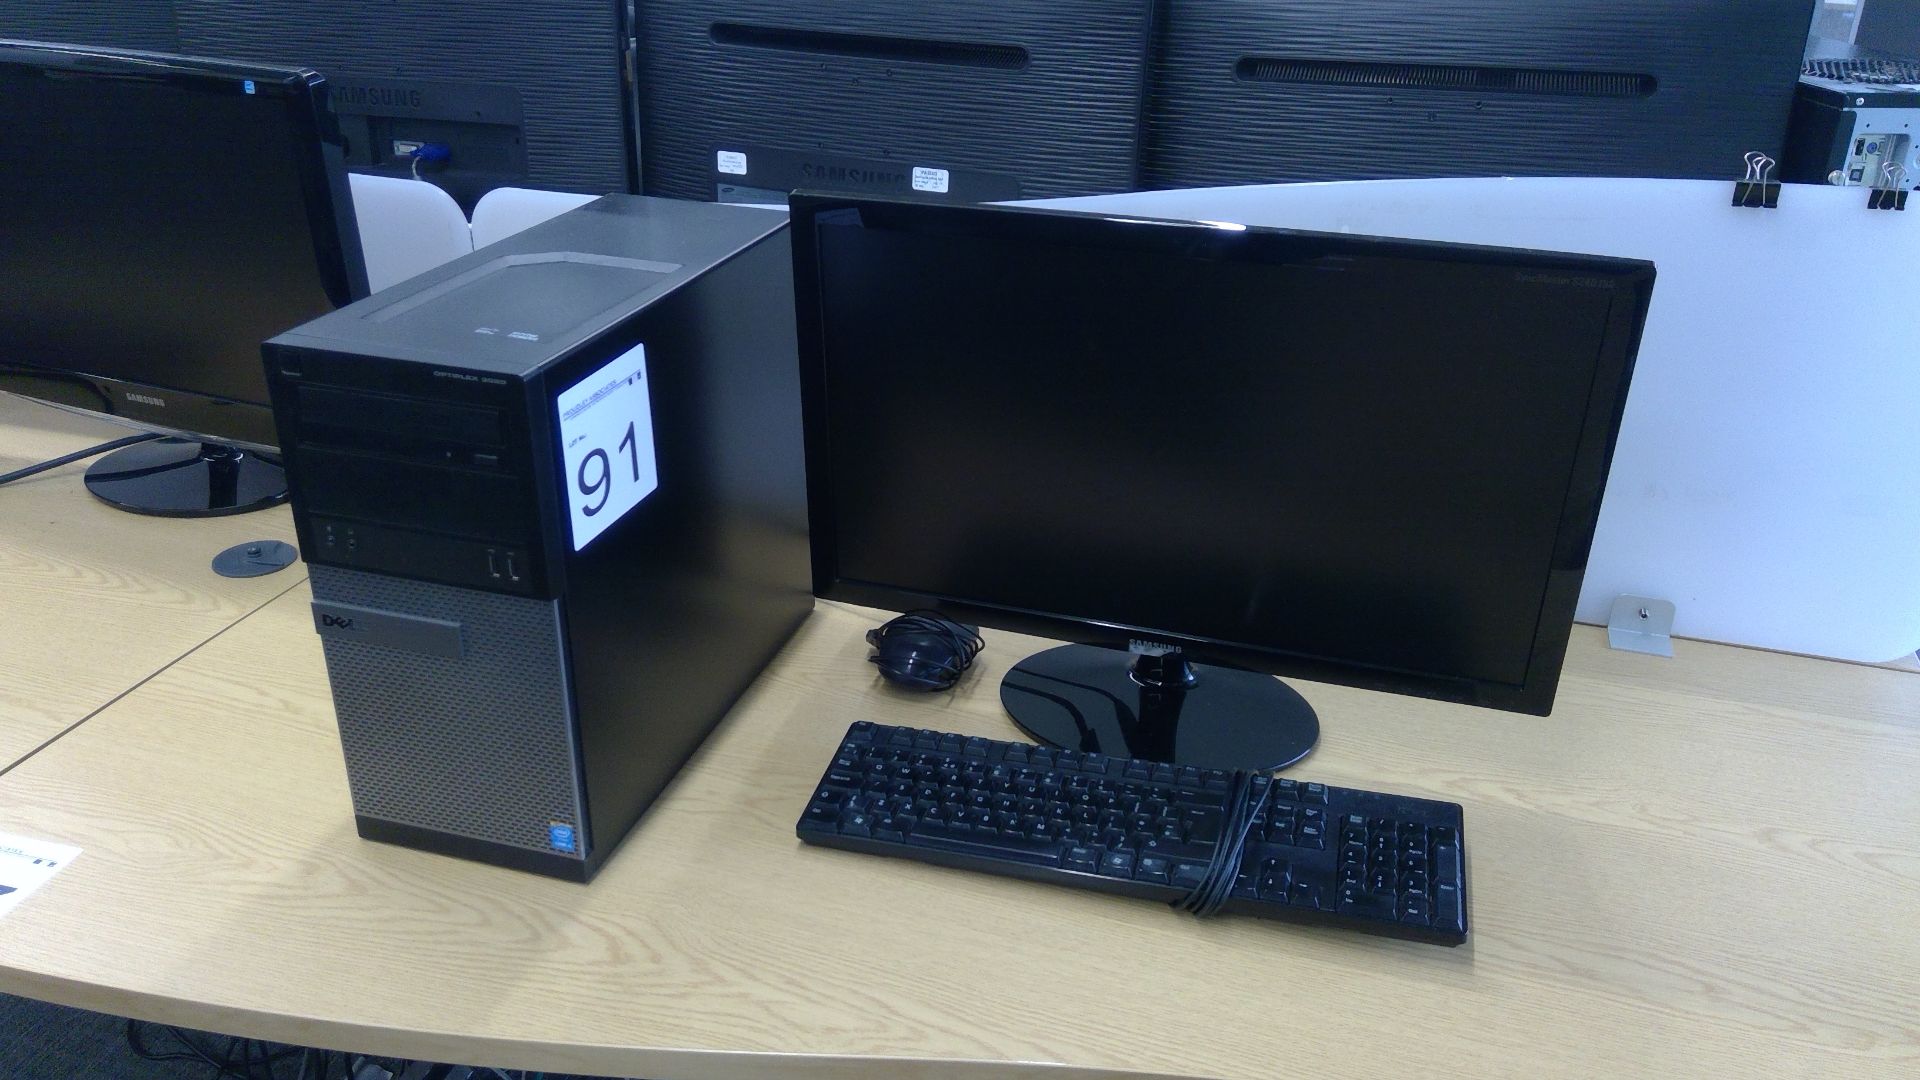 Dell Optiplex 3020 Core i5 complete with Samsung S24B150 monitor, keyboard and mouse